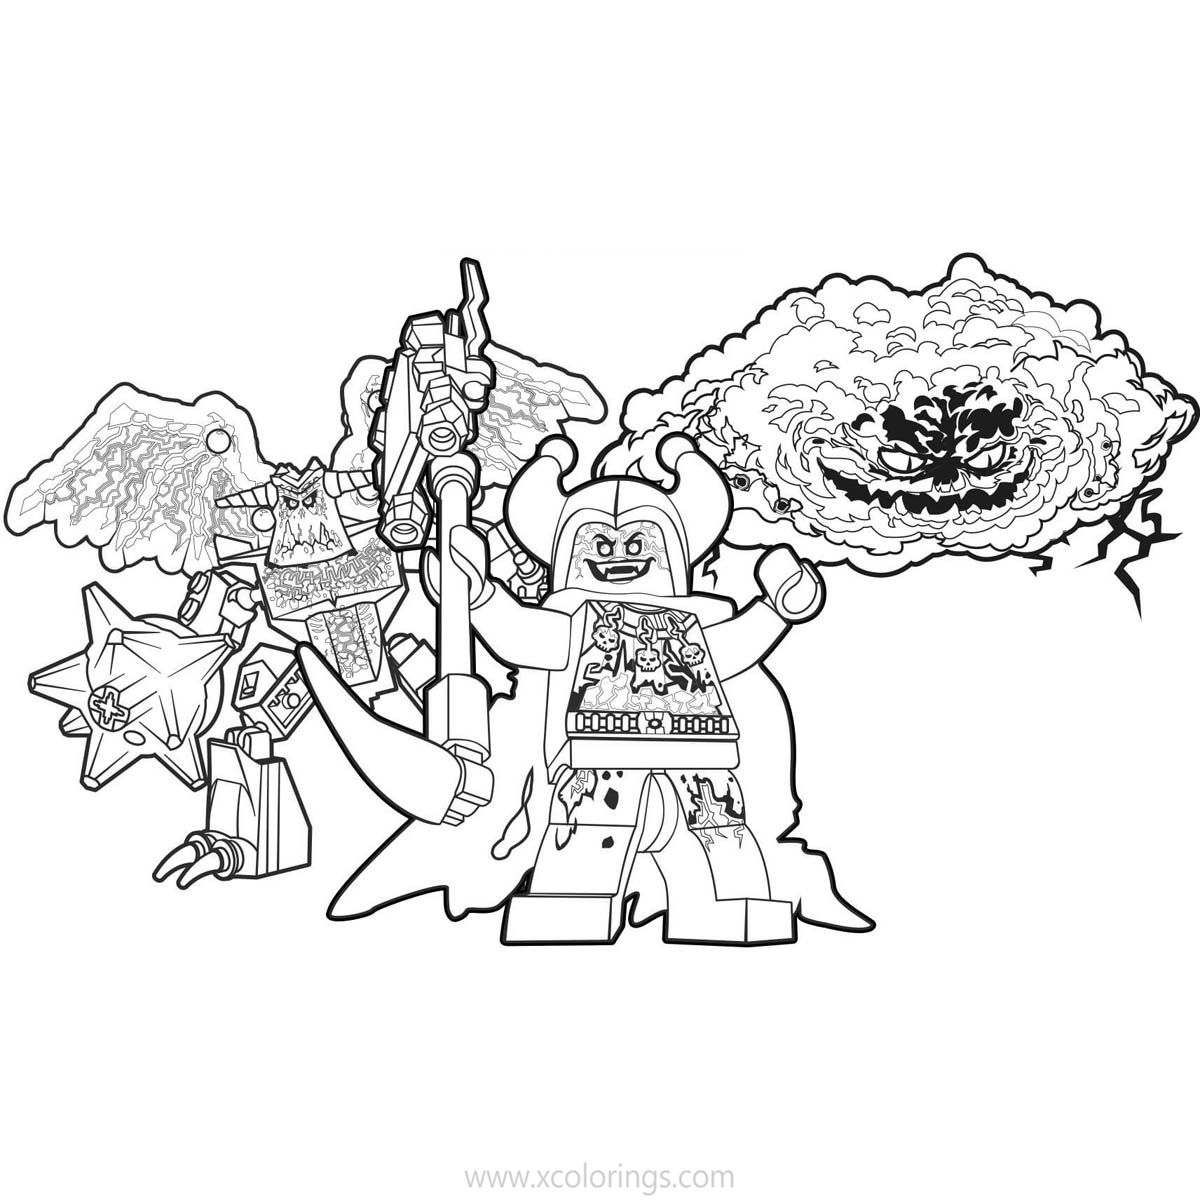 Free LEGO NEXO Knights Coloring Pages Jestor and Monsters printable